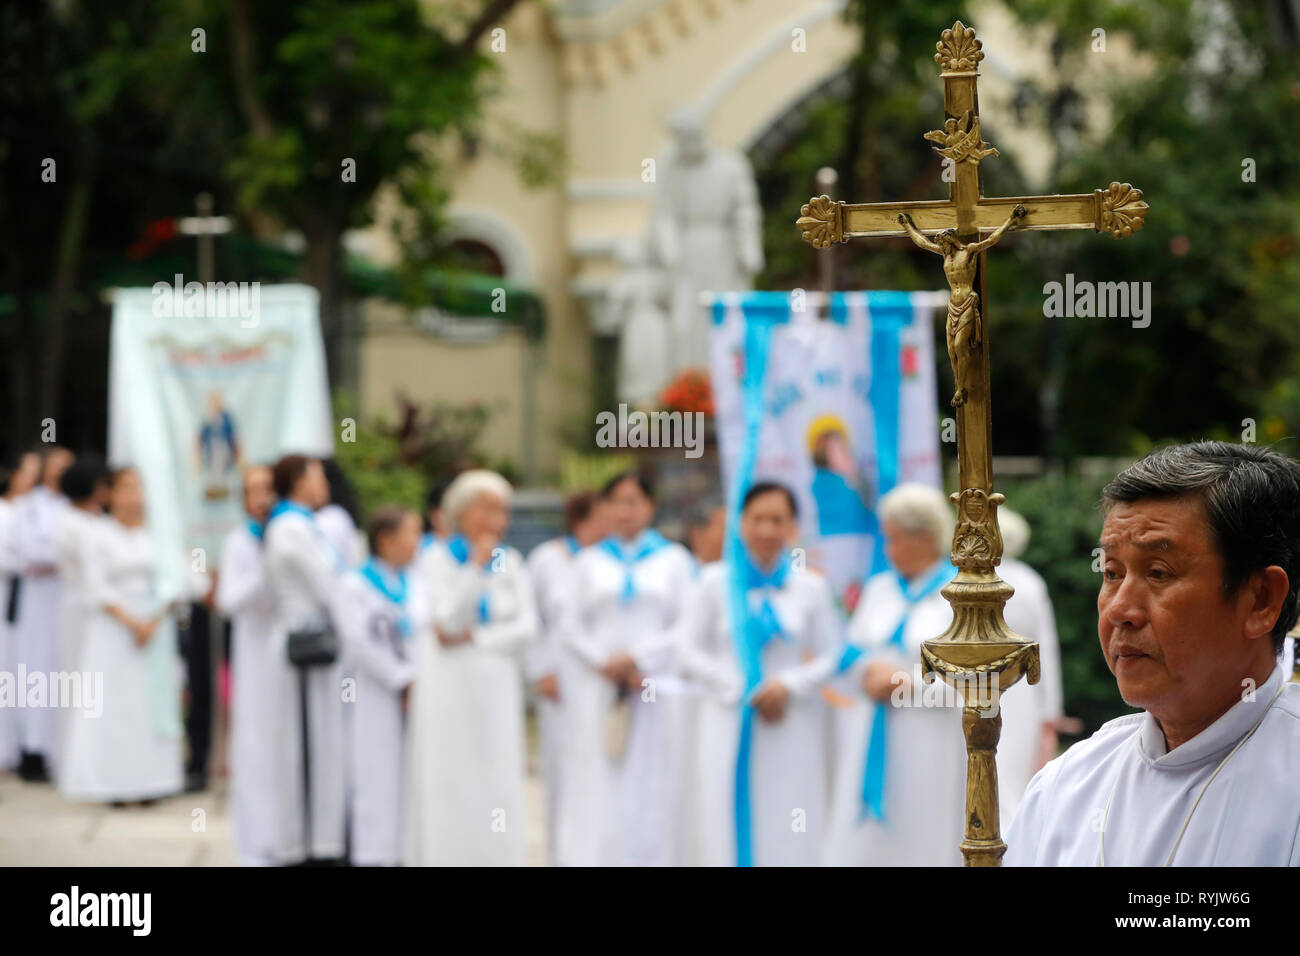 St Philip church ( Huyen Sy Church ).  The feast of the Assumption of the Virgin Mary. Procession.  Ho Chi Minh City.  Vietnam. Stock Photo